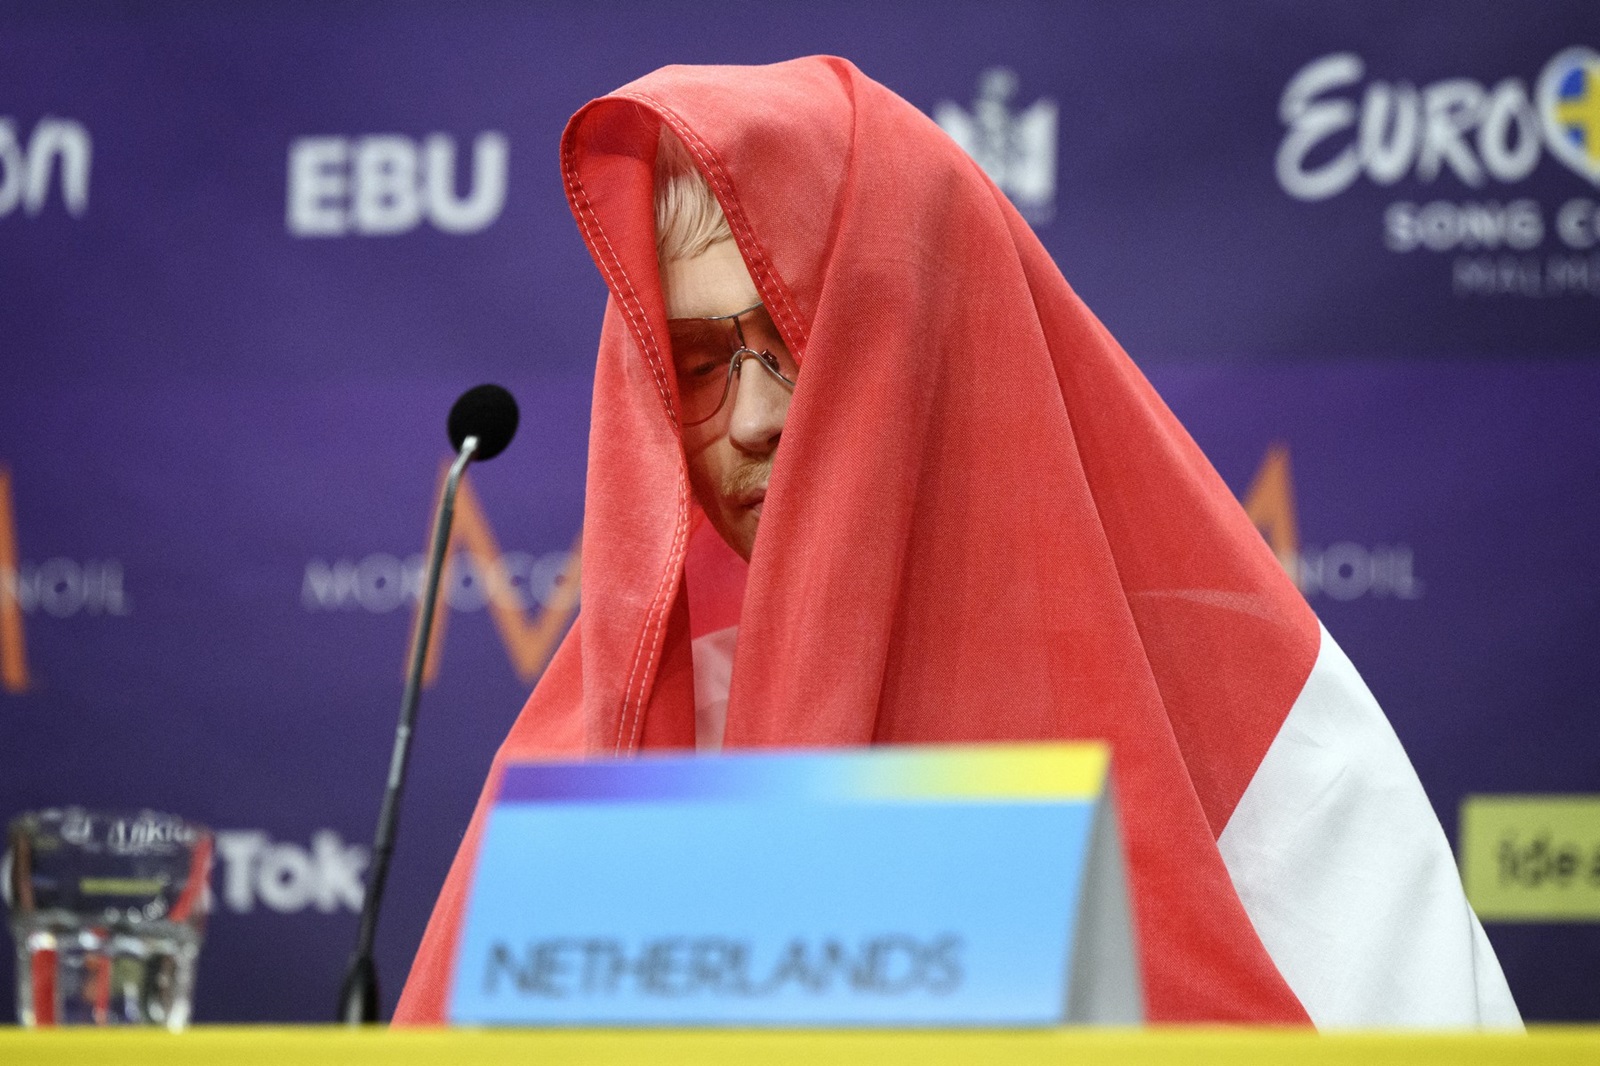 Joost Klein representing the Netherlands with the song "Europapa" attends a press conference with the entries that advanced to the final after the second semi-final of the 68th edition of the Eurovision Song Contest (ESC) at the Malmo Arena, in Malmo, Sweden, on May 9, 2024. Dutch contestant Joost Klein was dropped from the Eurovision final just hours before the event following an incident unlinked to the controversy over Israel's participation amid the Gaza war.,Image: 871958384, License: Rights-managed, Restrictions: Sweden OUT, Model Release: no, Credit line: Jessica Gow/TT / AFP / Profimedia